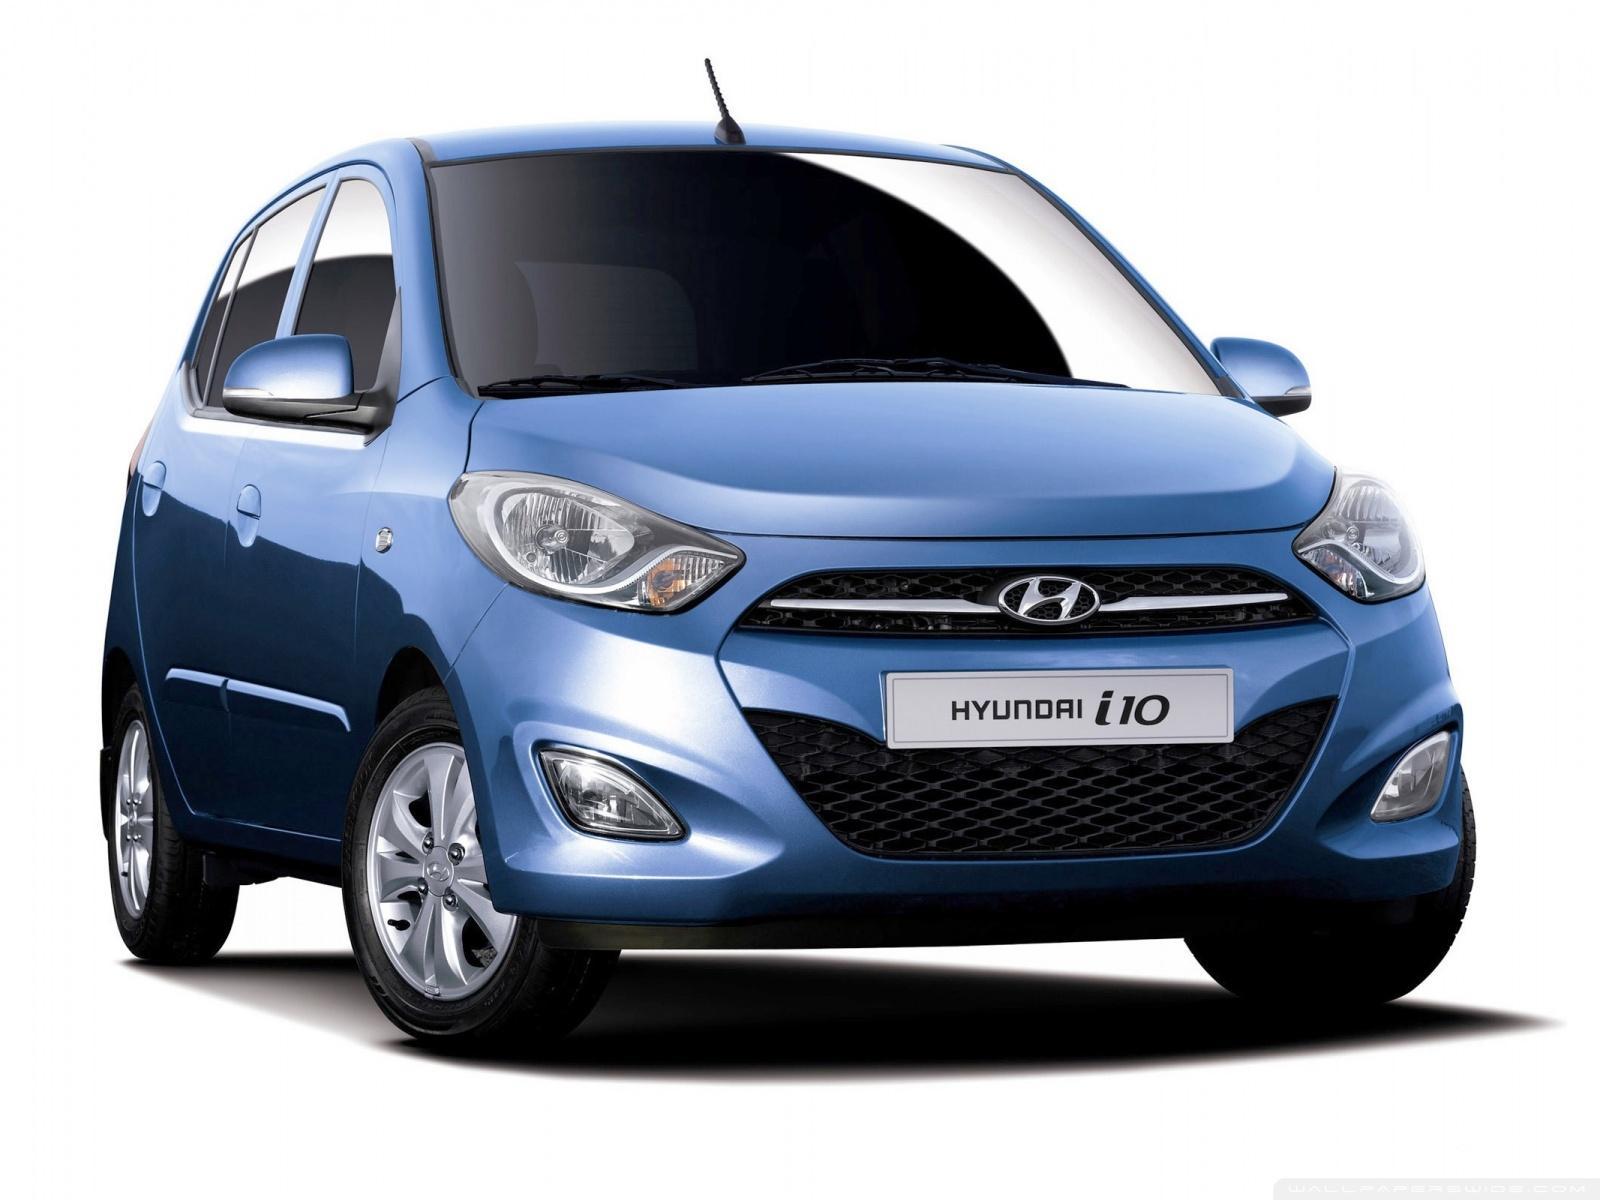 Download Hyundai i10 wallpaper - Cars wallpapers for your mobile cell phone